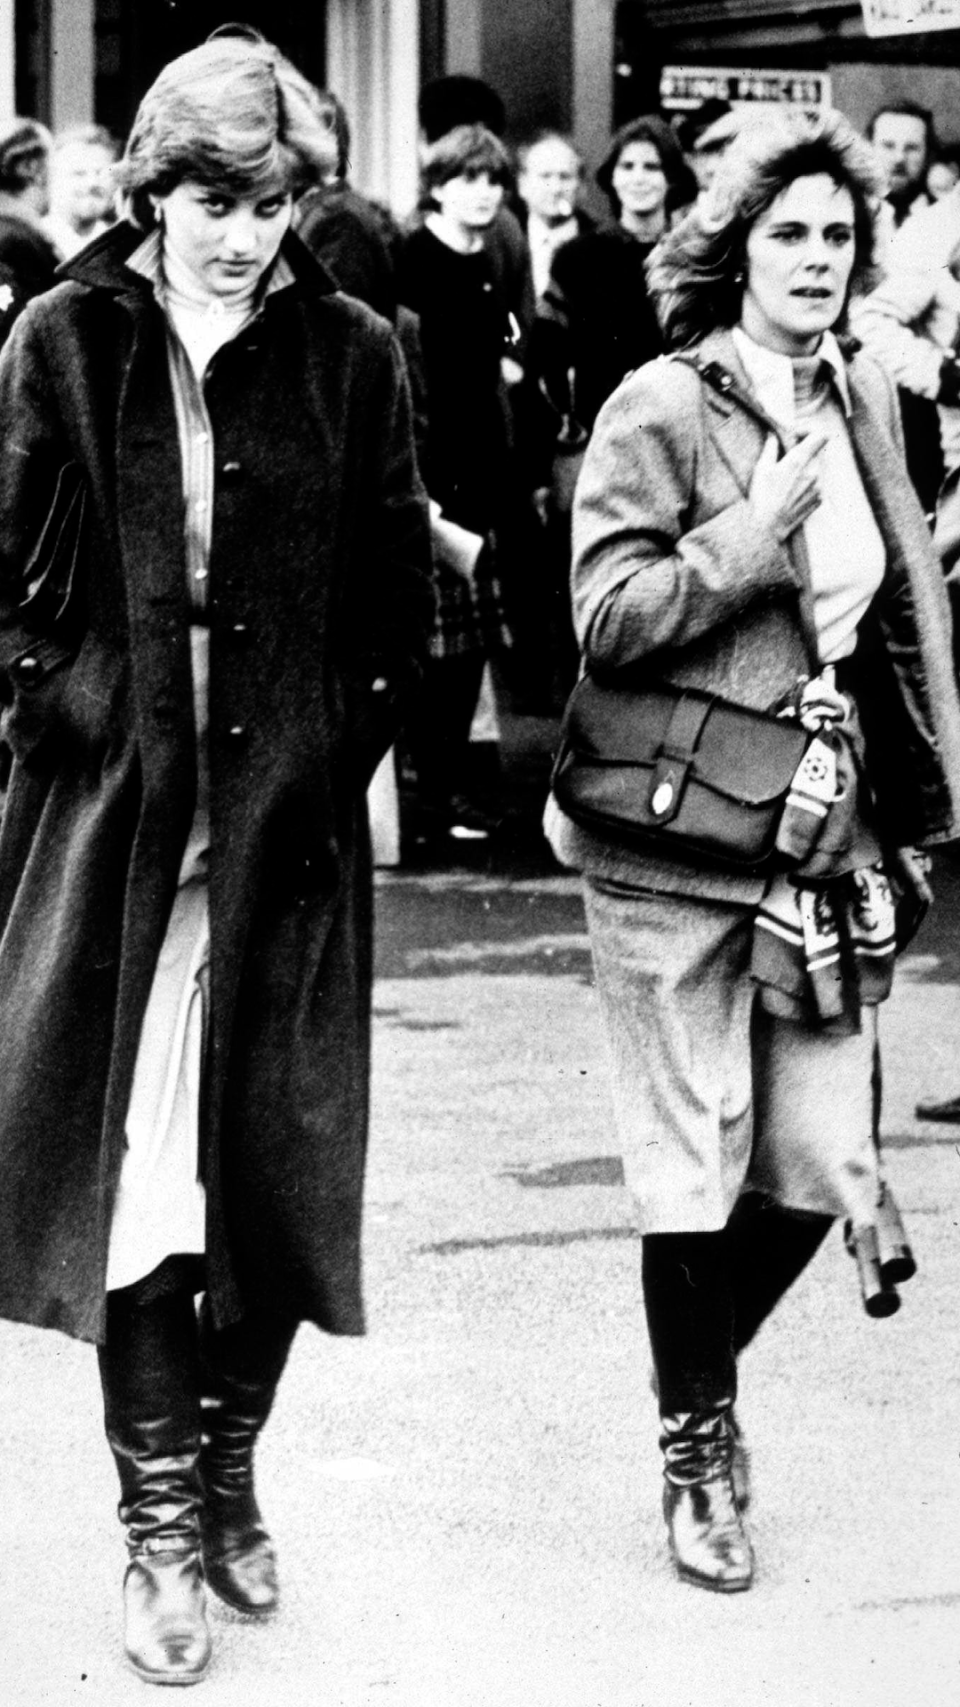 <p> In 1980, Princess Diana was still in her teens when romance began to blossom between her and Prince Charles. She was pictured that year at Ludlow Races, where he was competing, along with his friend - the future Queen Camilla, who would go on to become his second wife. </p>